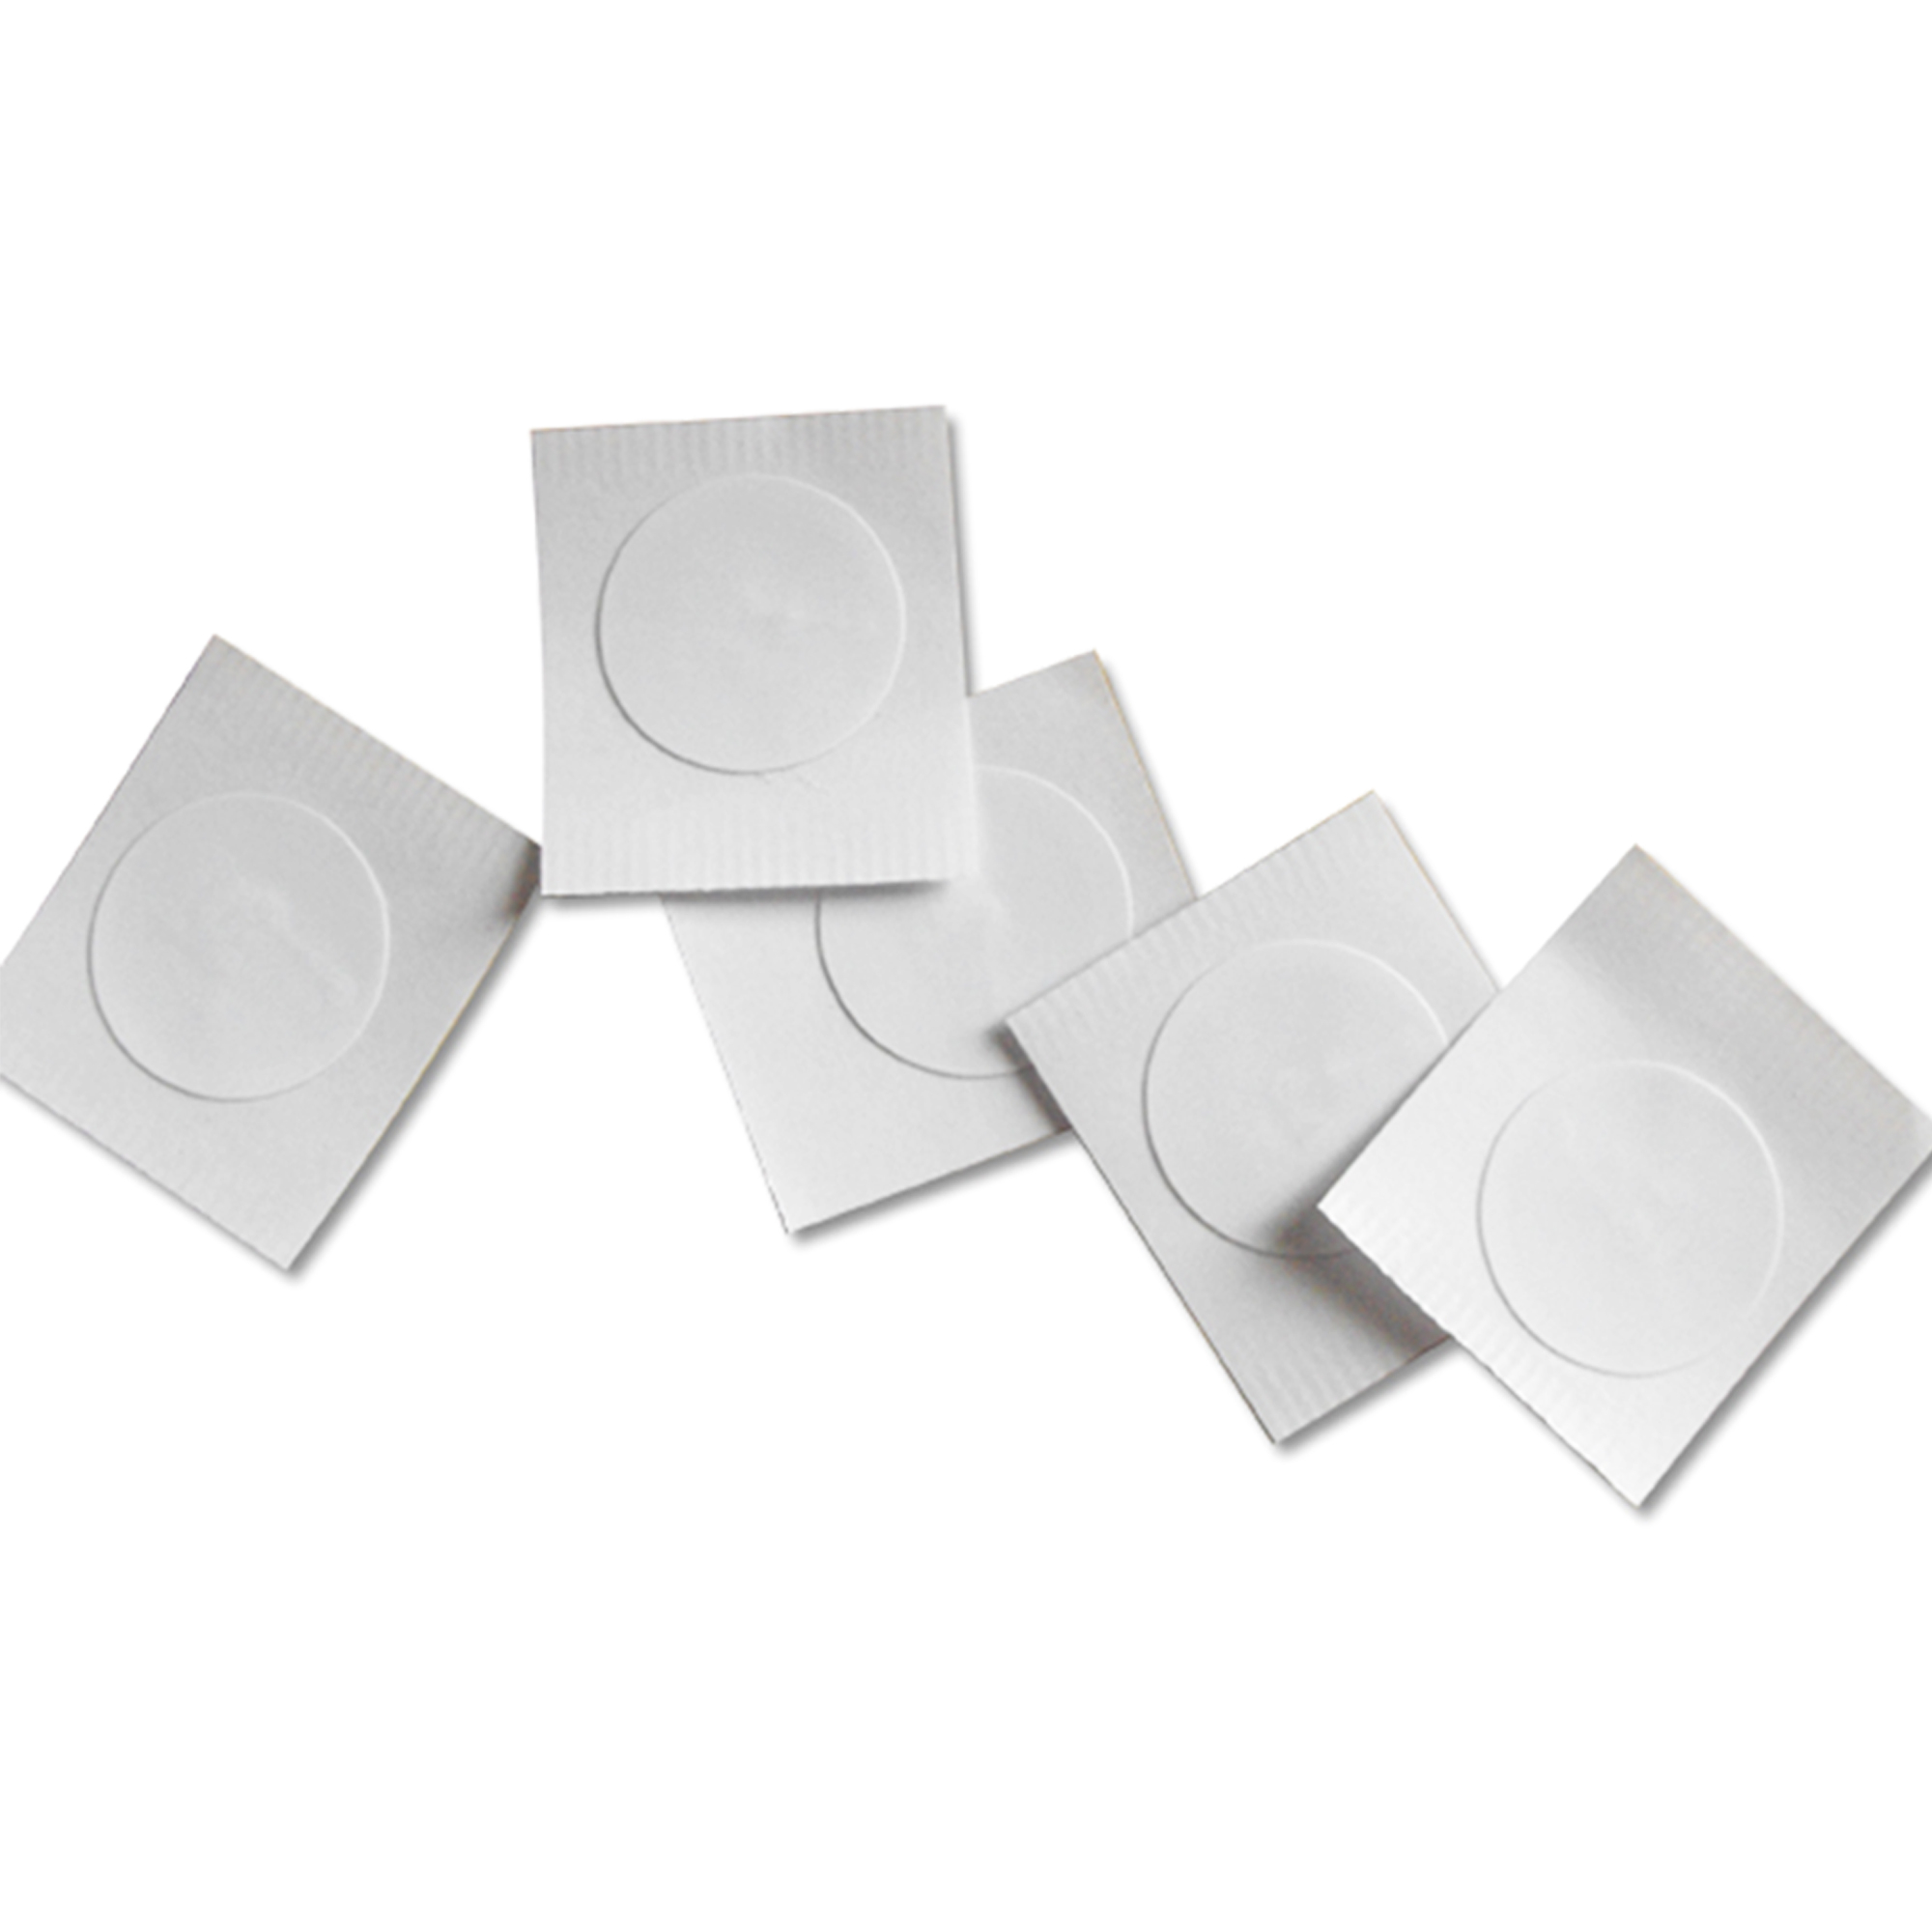 ISO14443A rewritable adhesive RFID Stickers with MF1K chip tag label